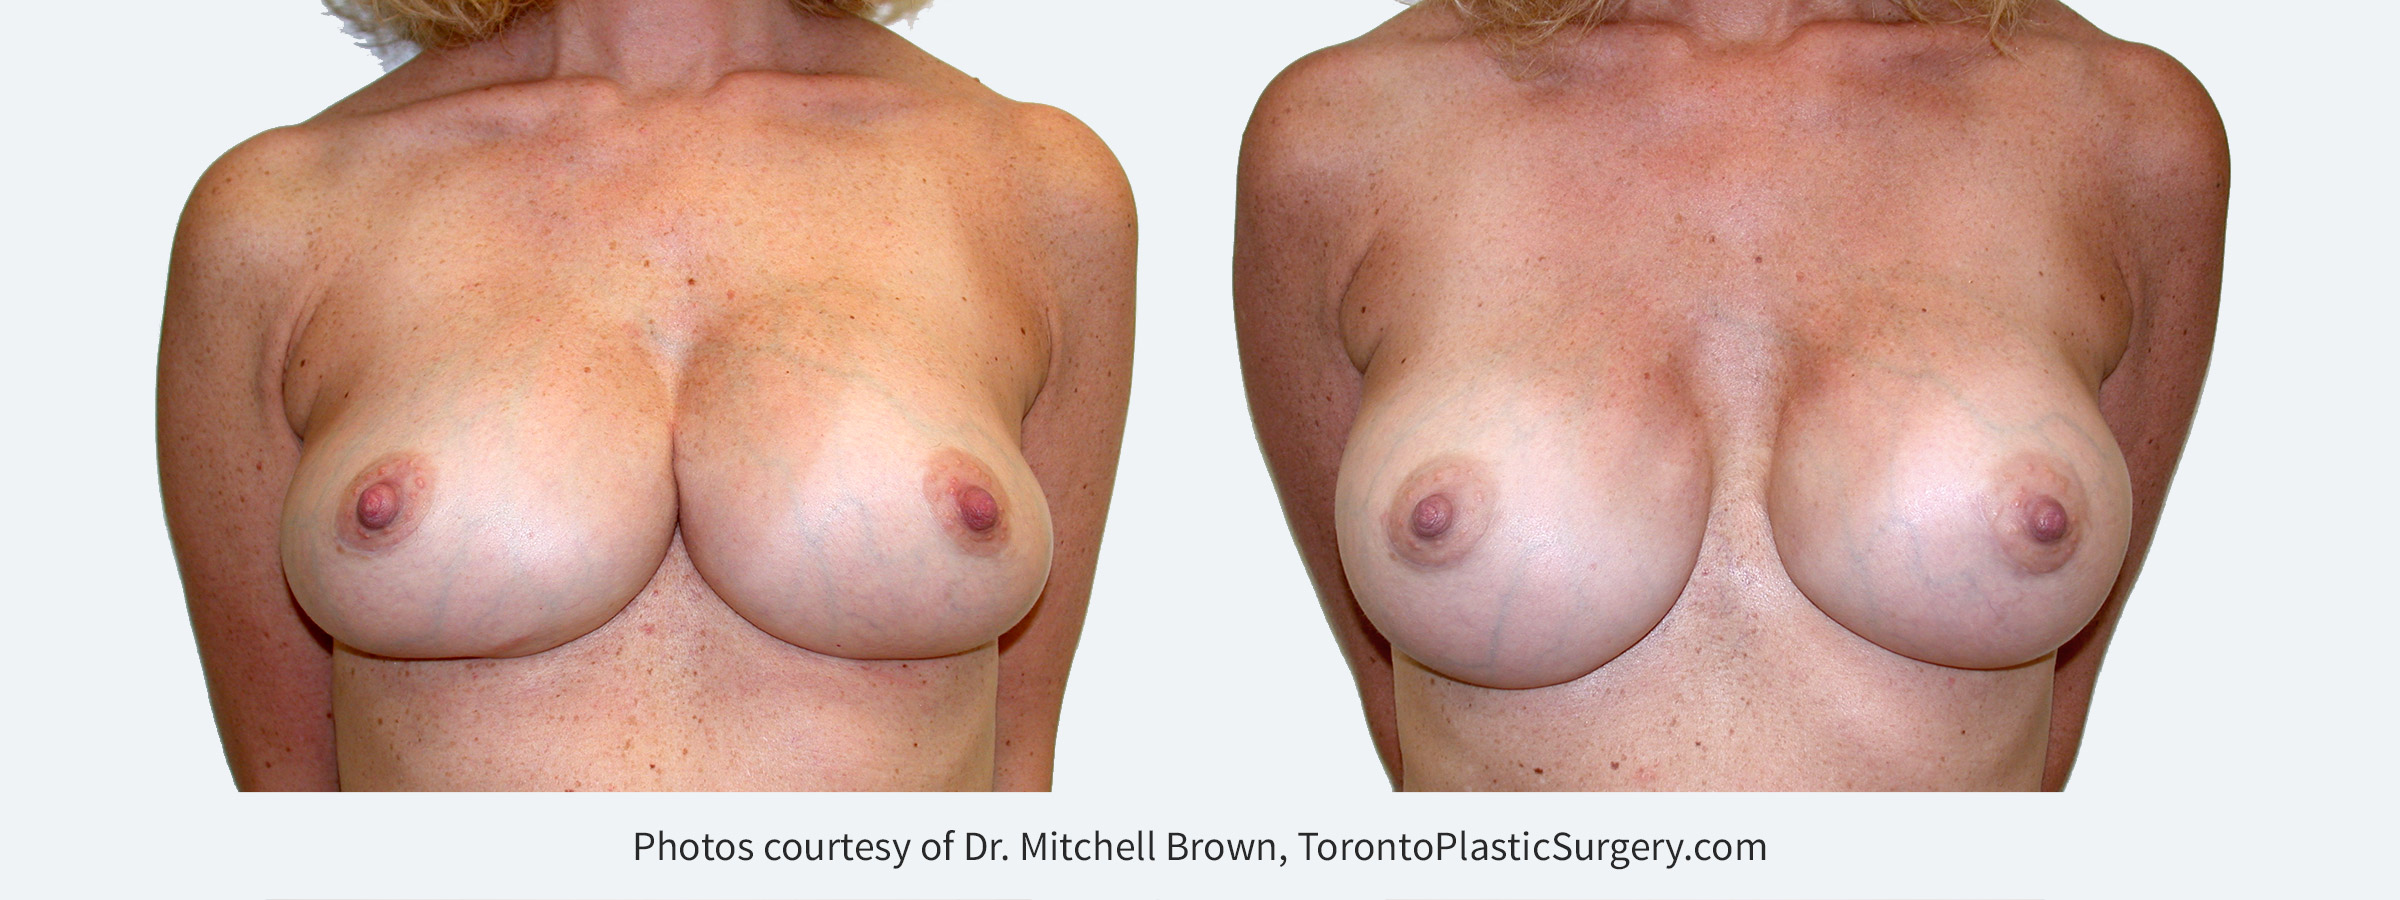 Synmastia (implants too close together). Corrected by placing smaller and narrower implants in a new pocket under the pectoral muscle along with reinforcement of  the medial breast implant pocket. Before and 6 months after